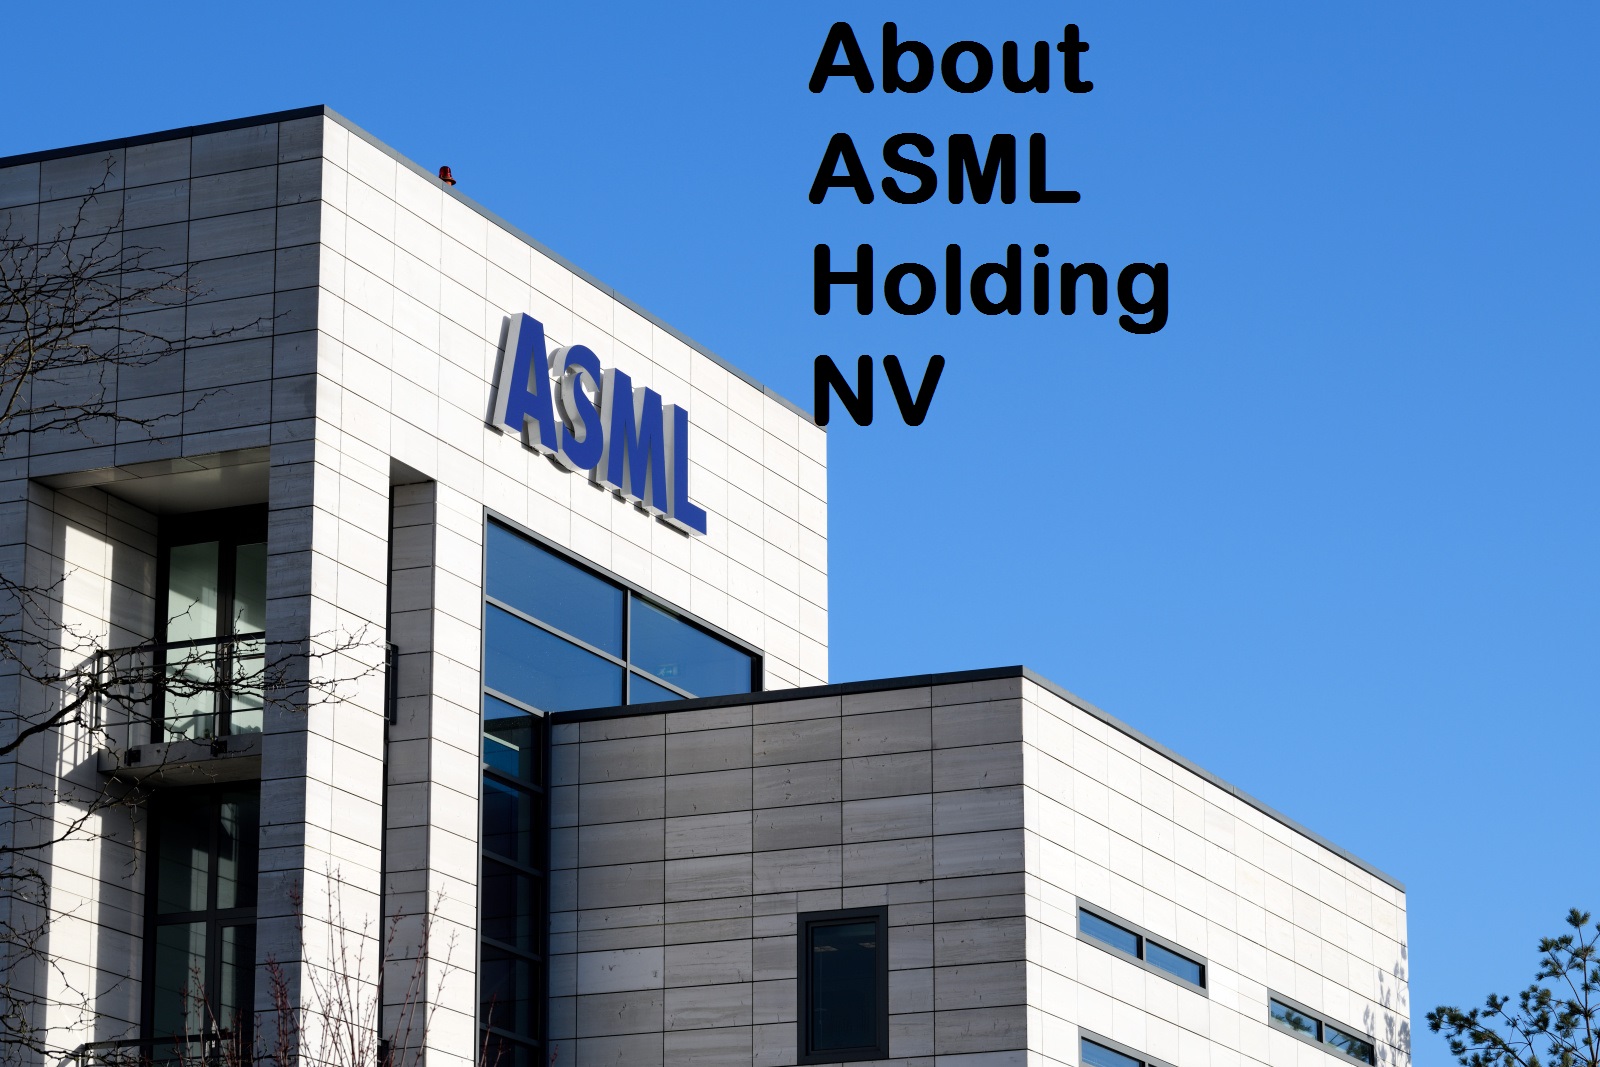 About ASML Holding NV